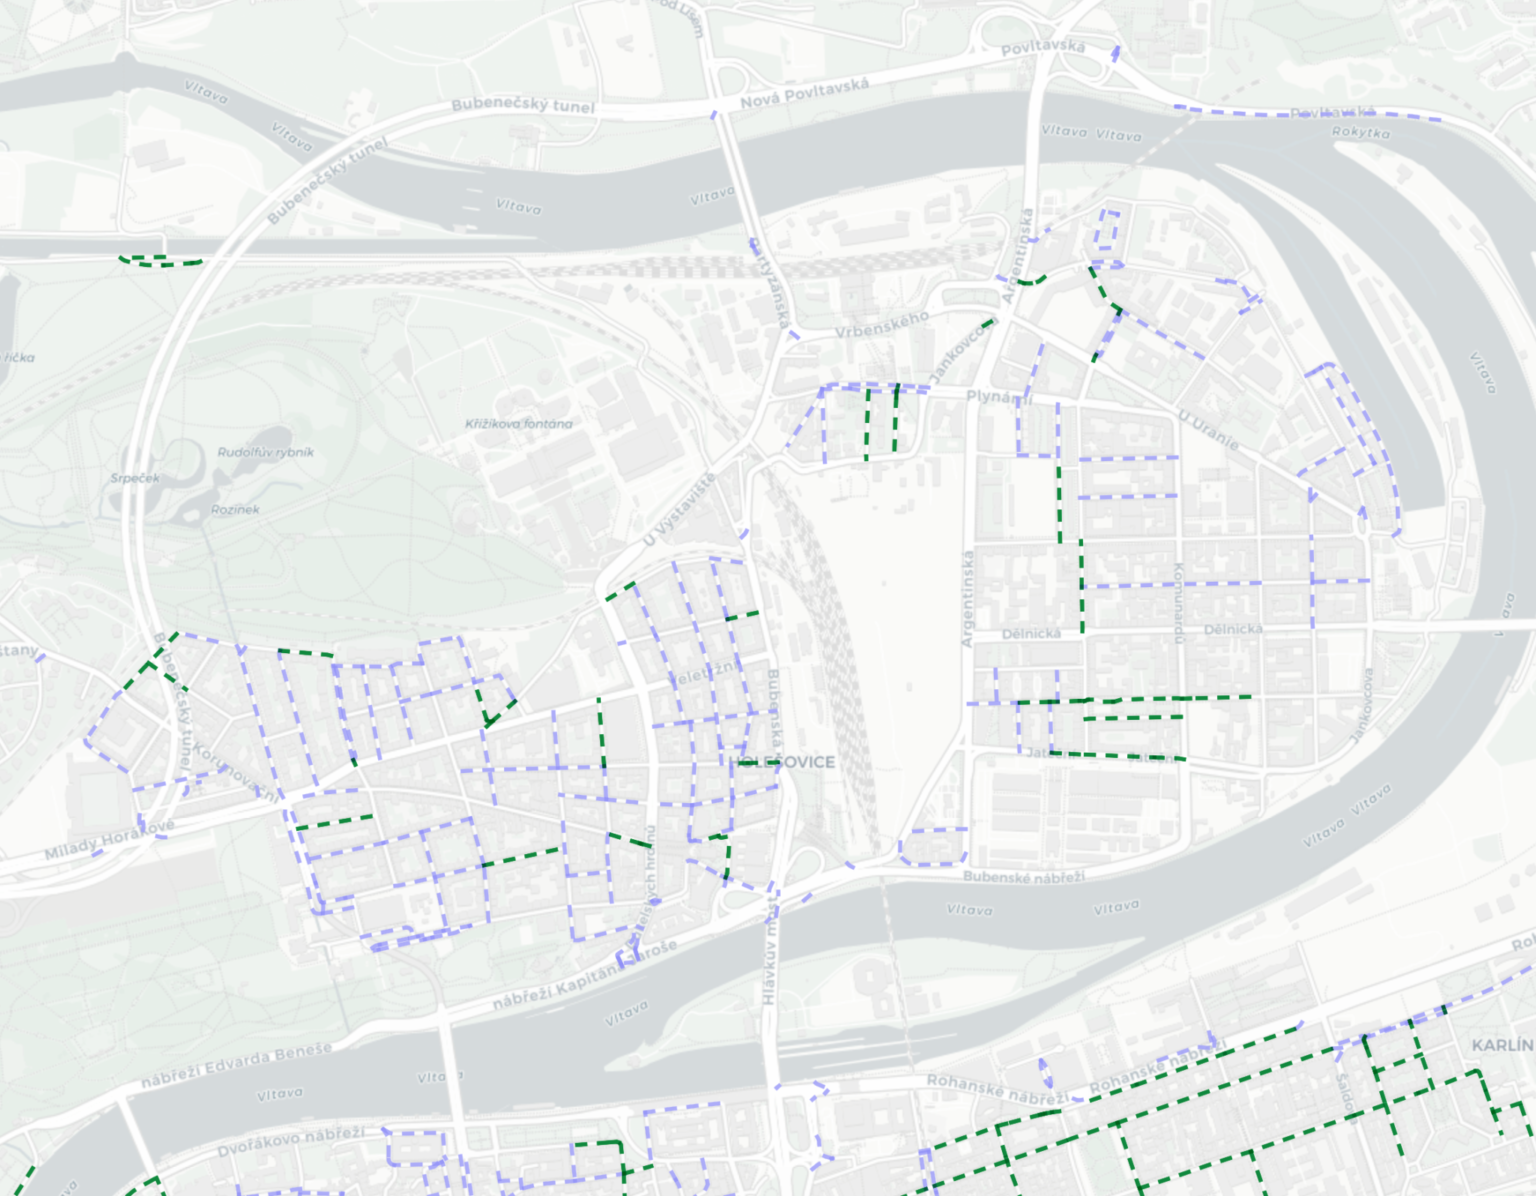 Green represents cycling contraflow lanes, while blue represents one-way streets in the street network of Prague 7. Within Prague, these measures are considered among the most progressive parts of the city.